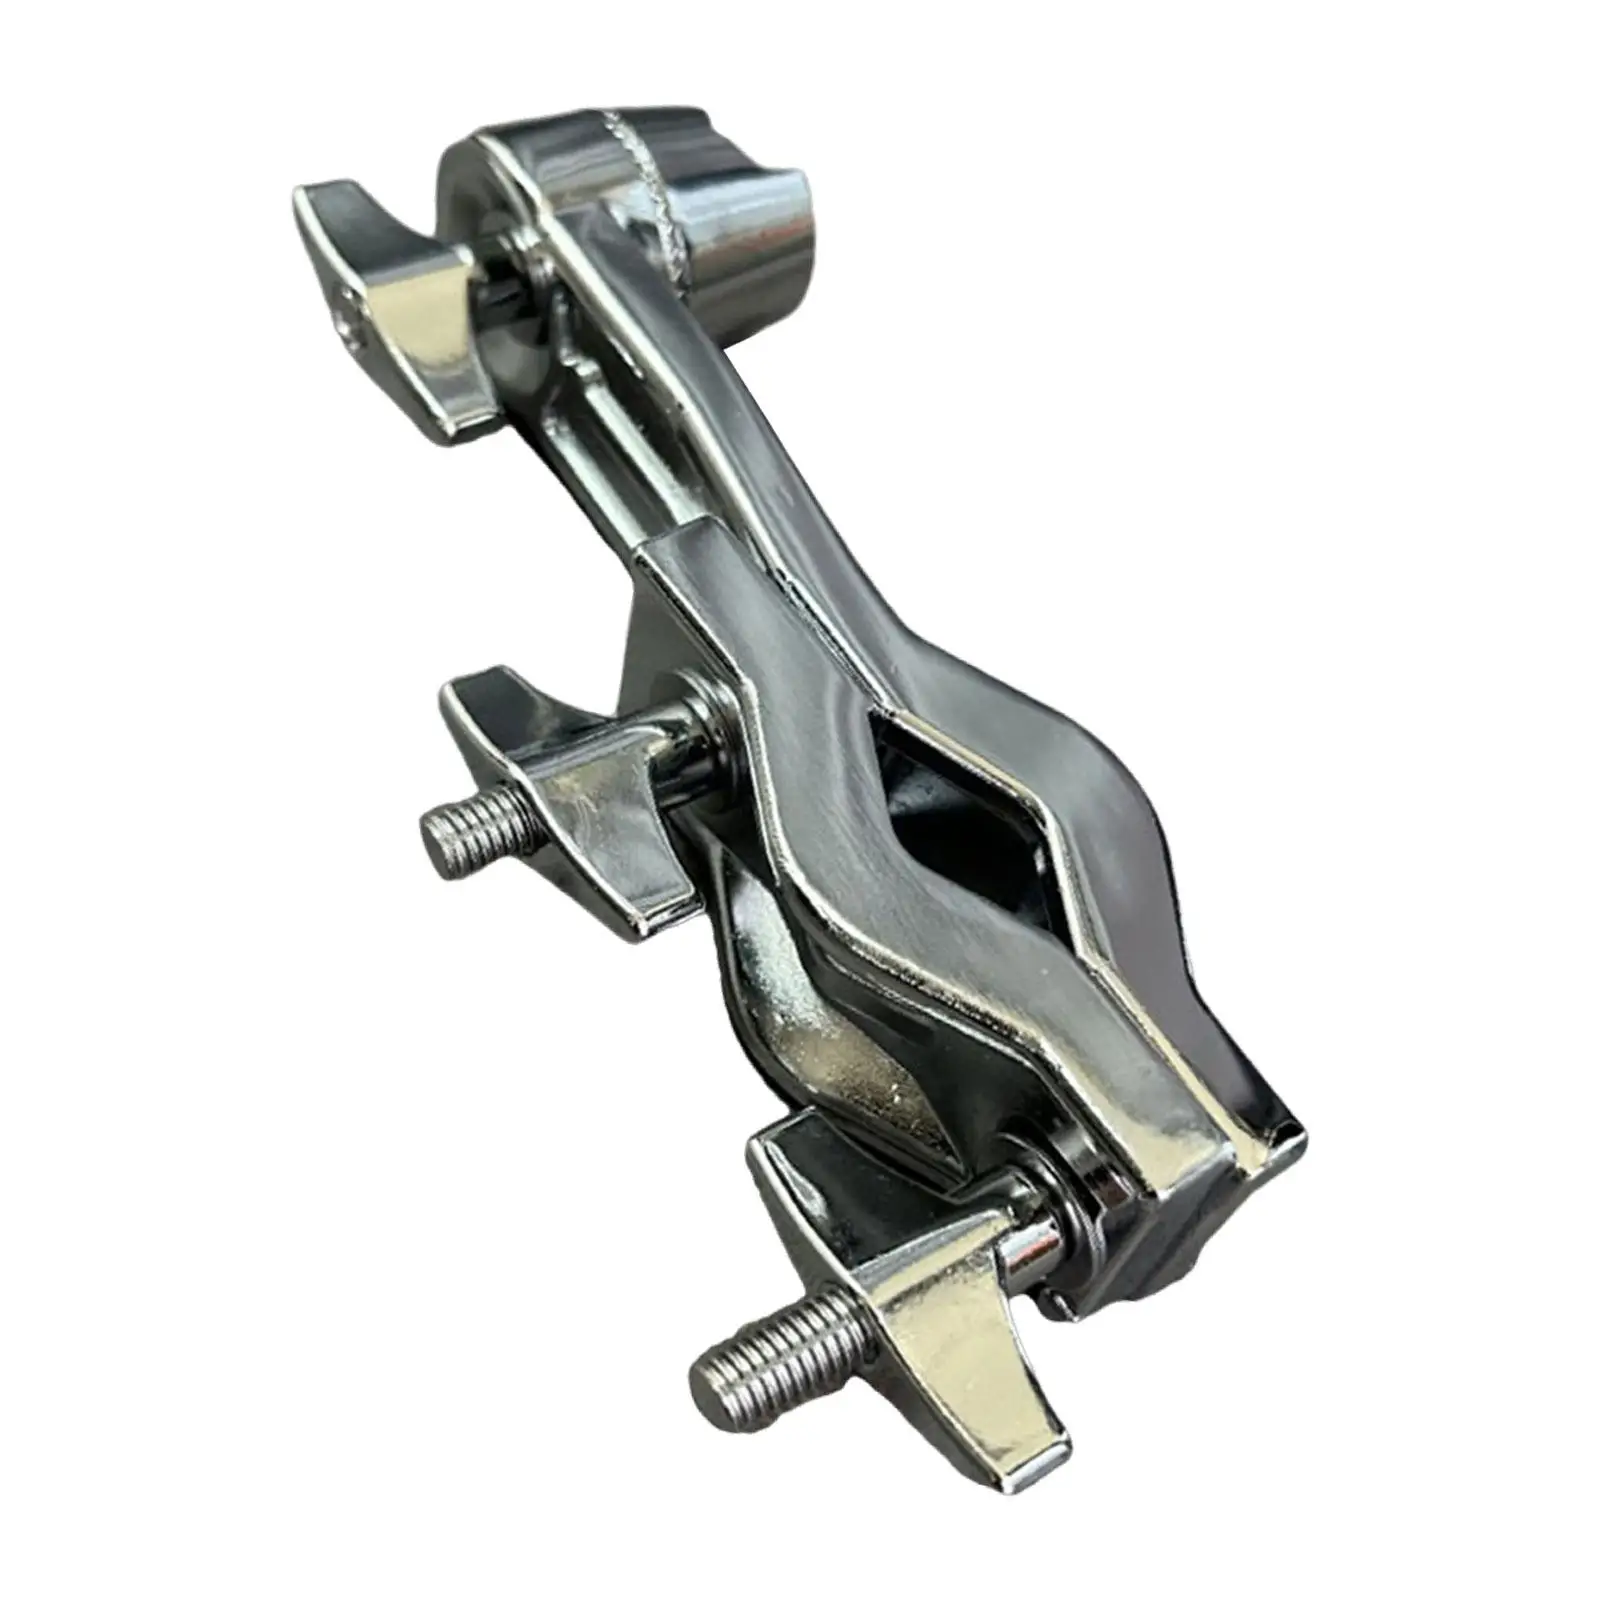 Drum Rack Clamp Clamp Mounting Bracket Metal Knob Universal Multi Clamp Drum Extension Stand Clamps Percussion Drum Accessories